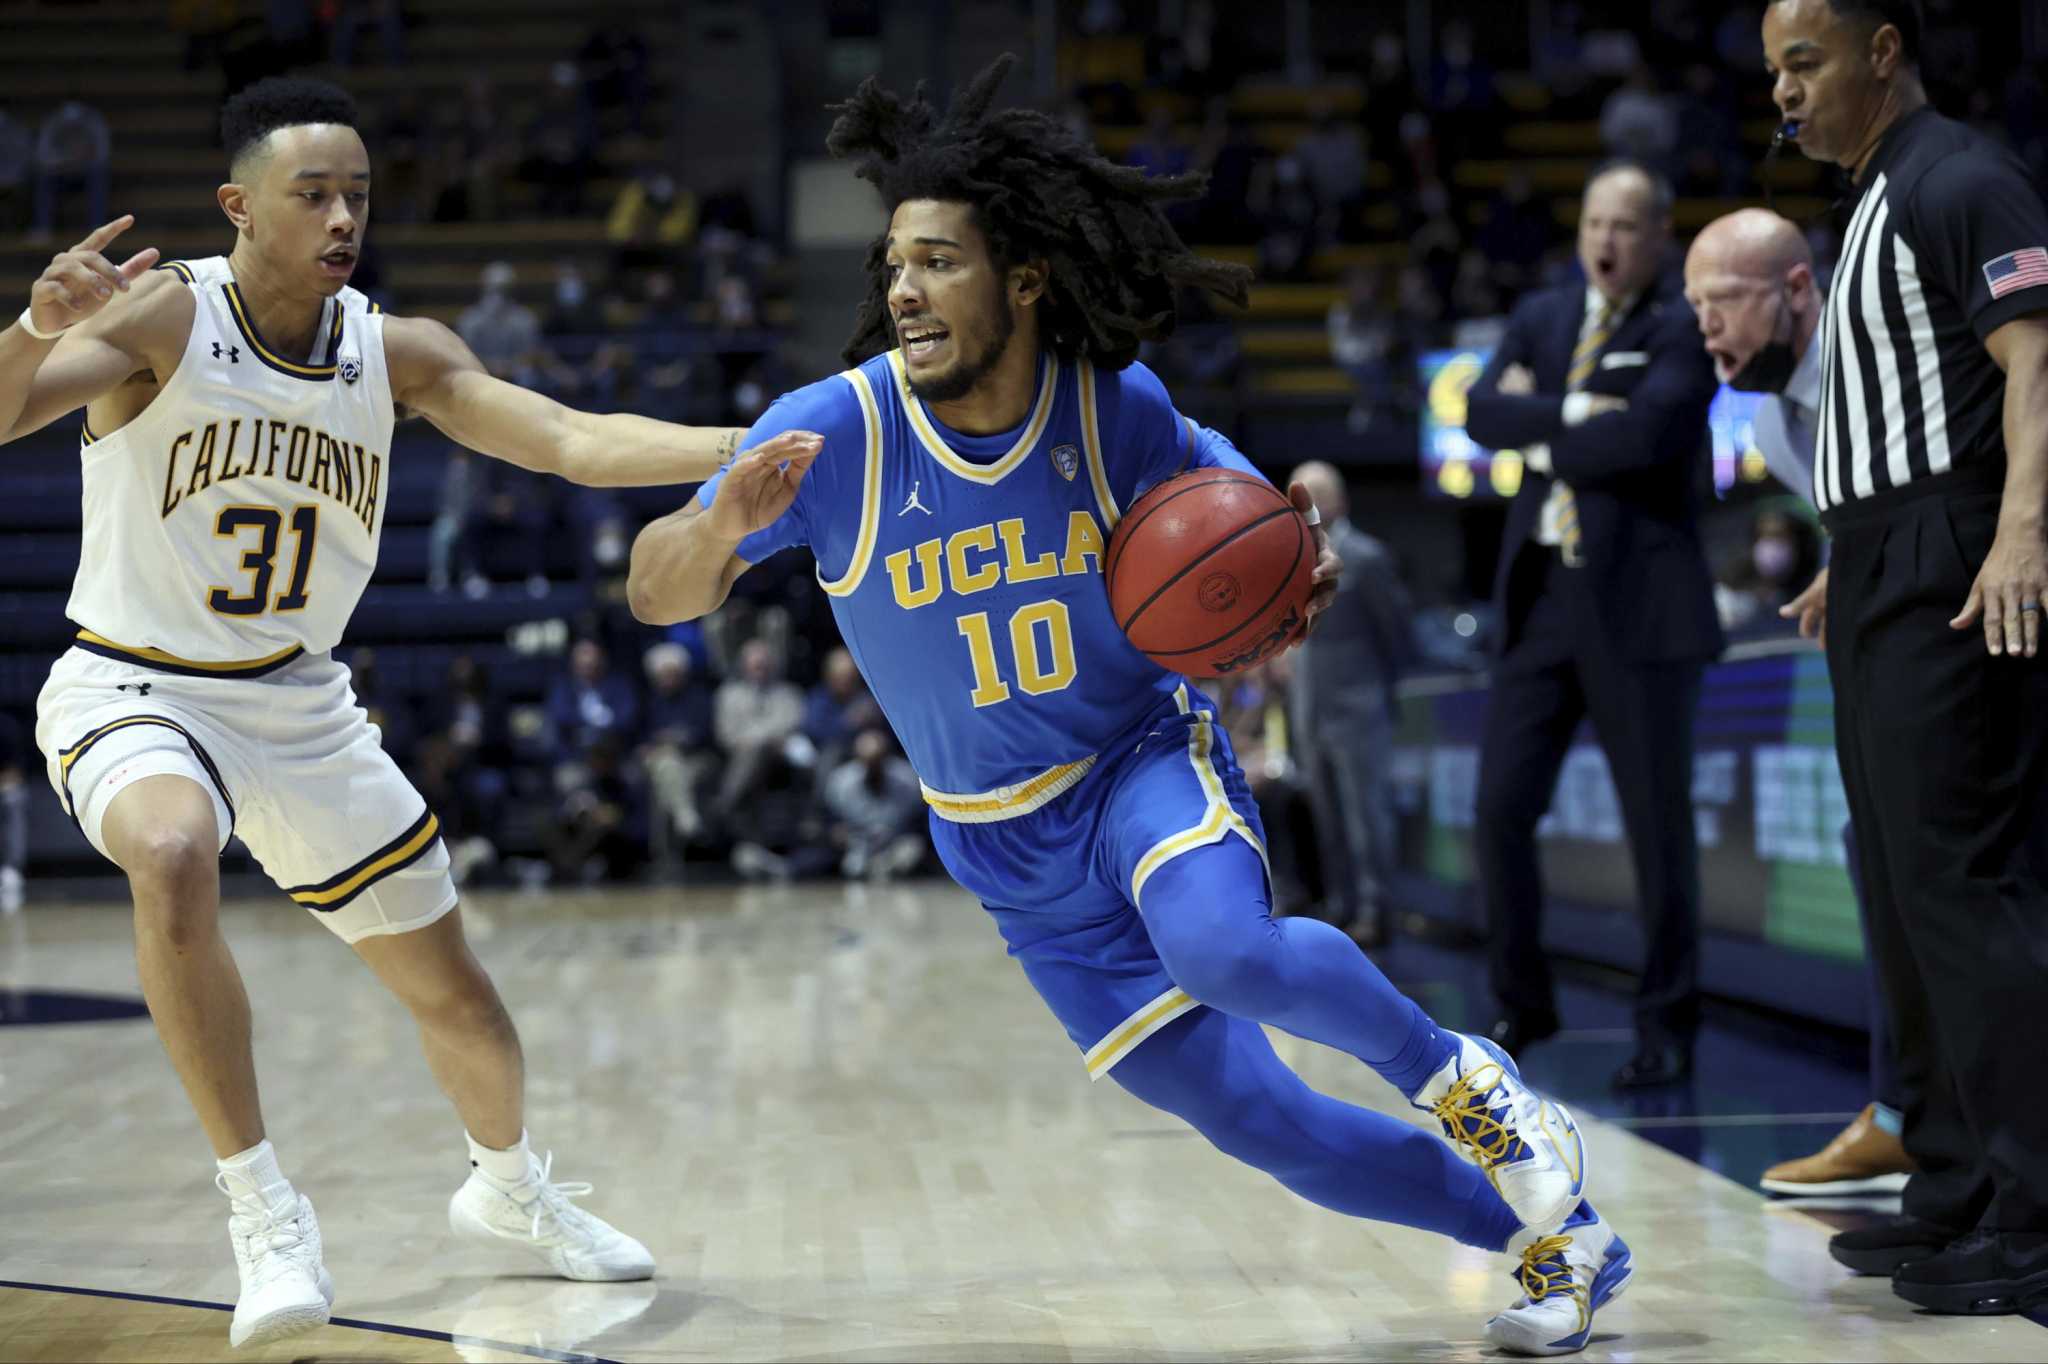 Disappointment and pride for Cal men after loss to No. 5 UCLA.